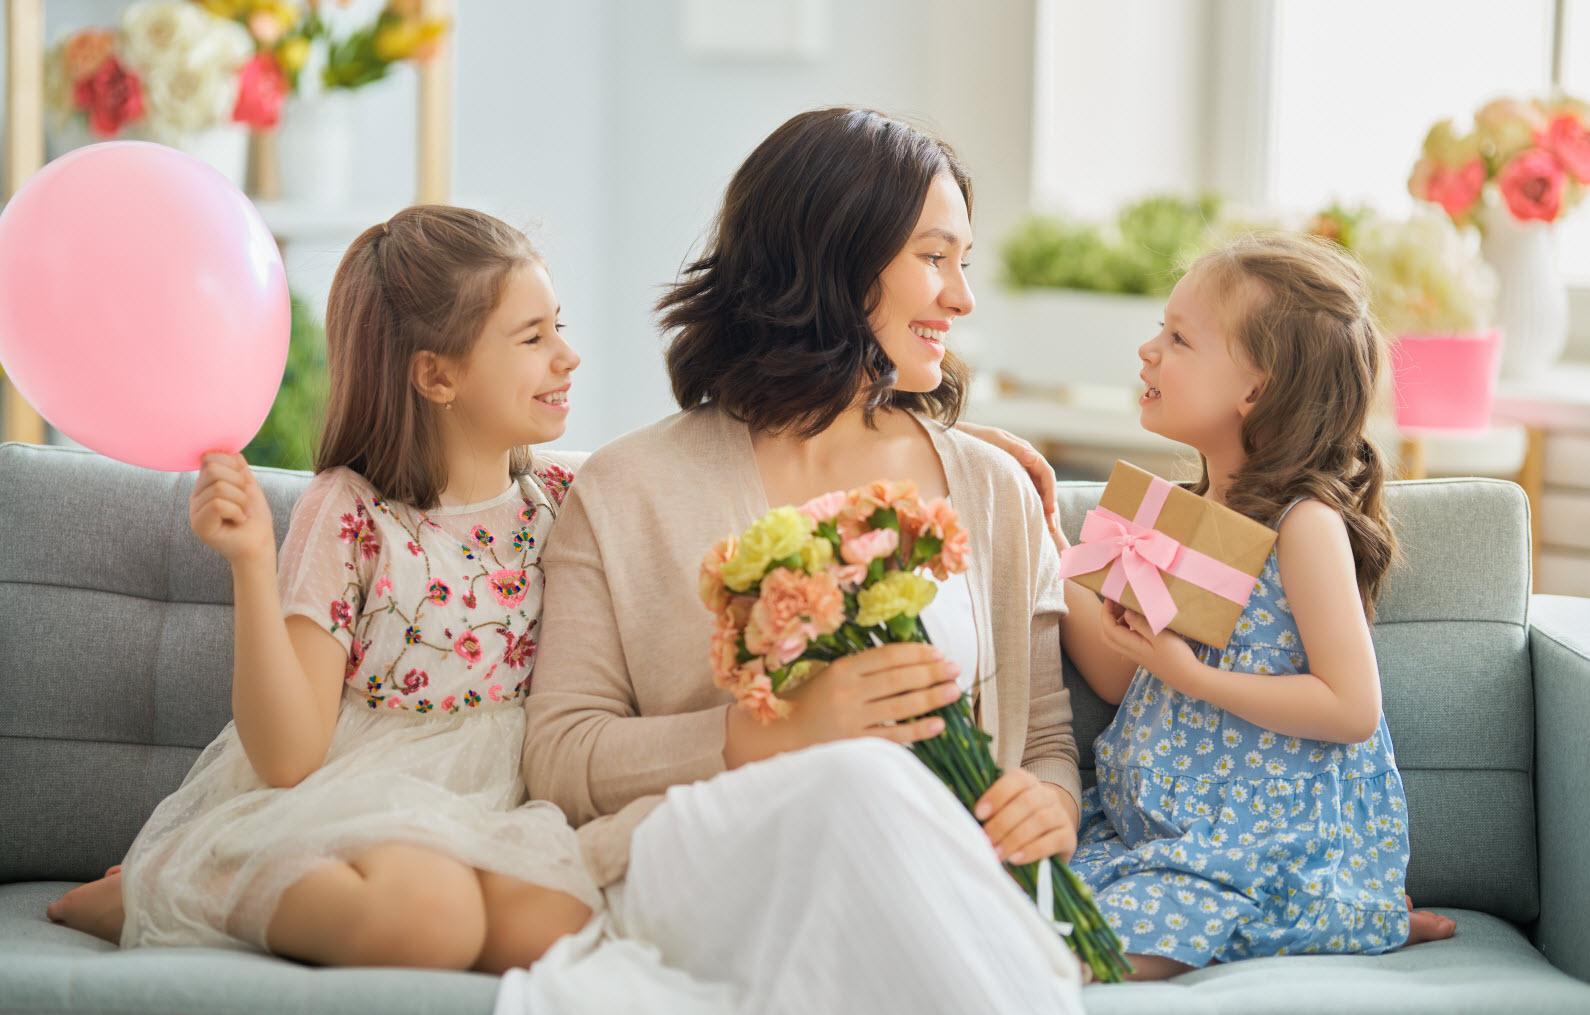 History of Mother’s Day: Origin of Mother’s Day Celebration